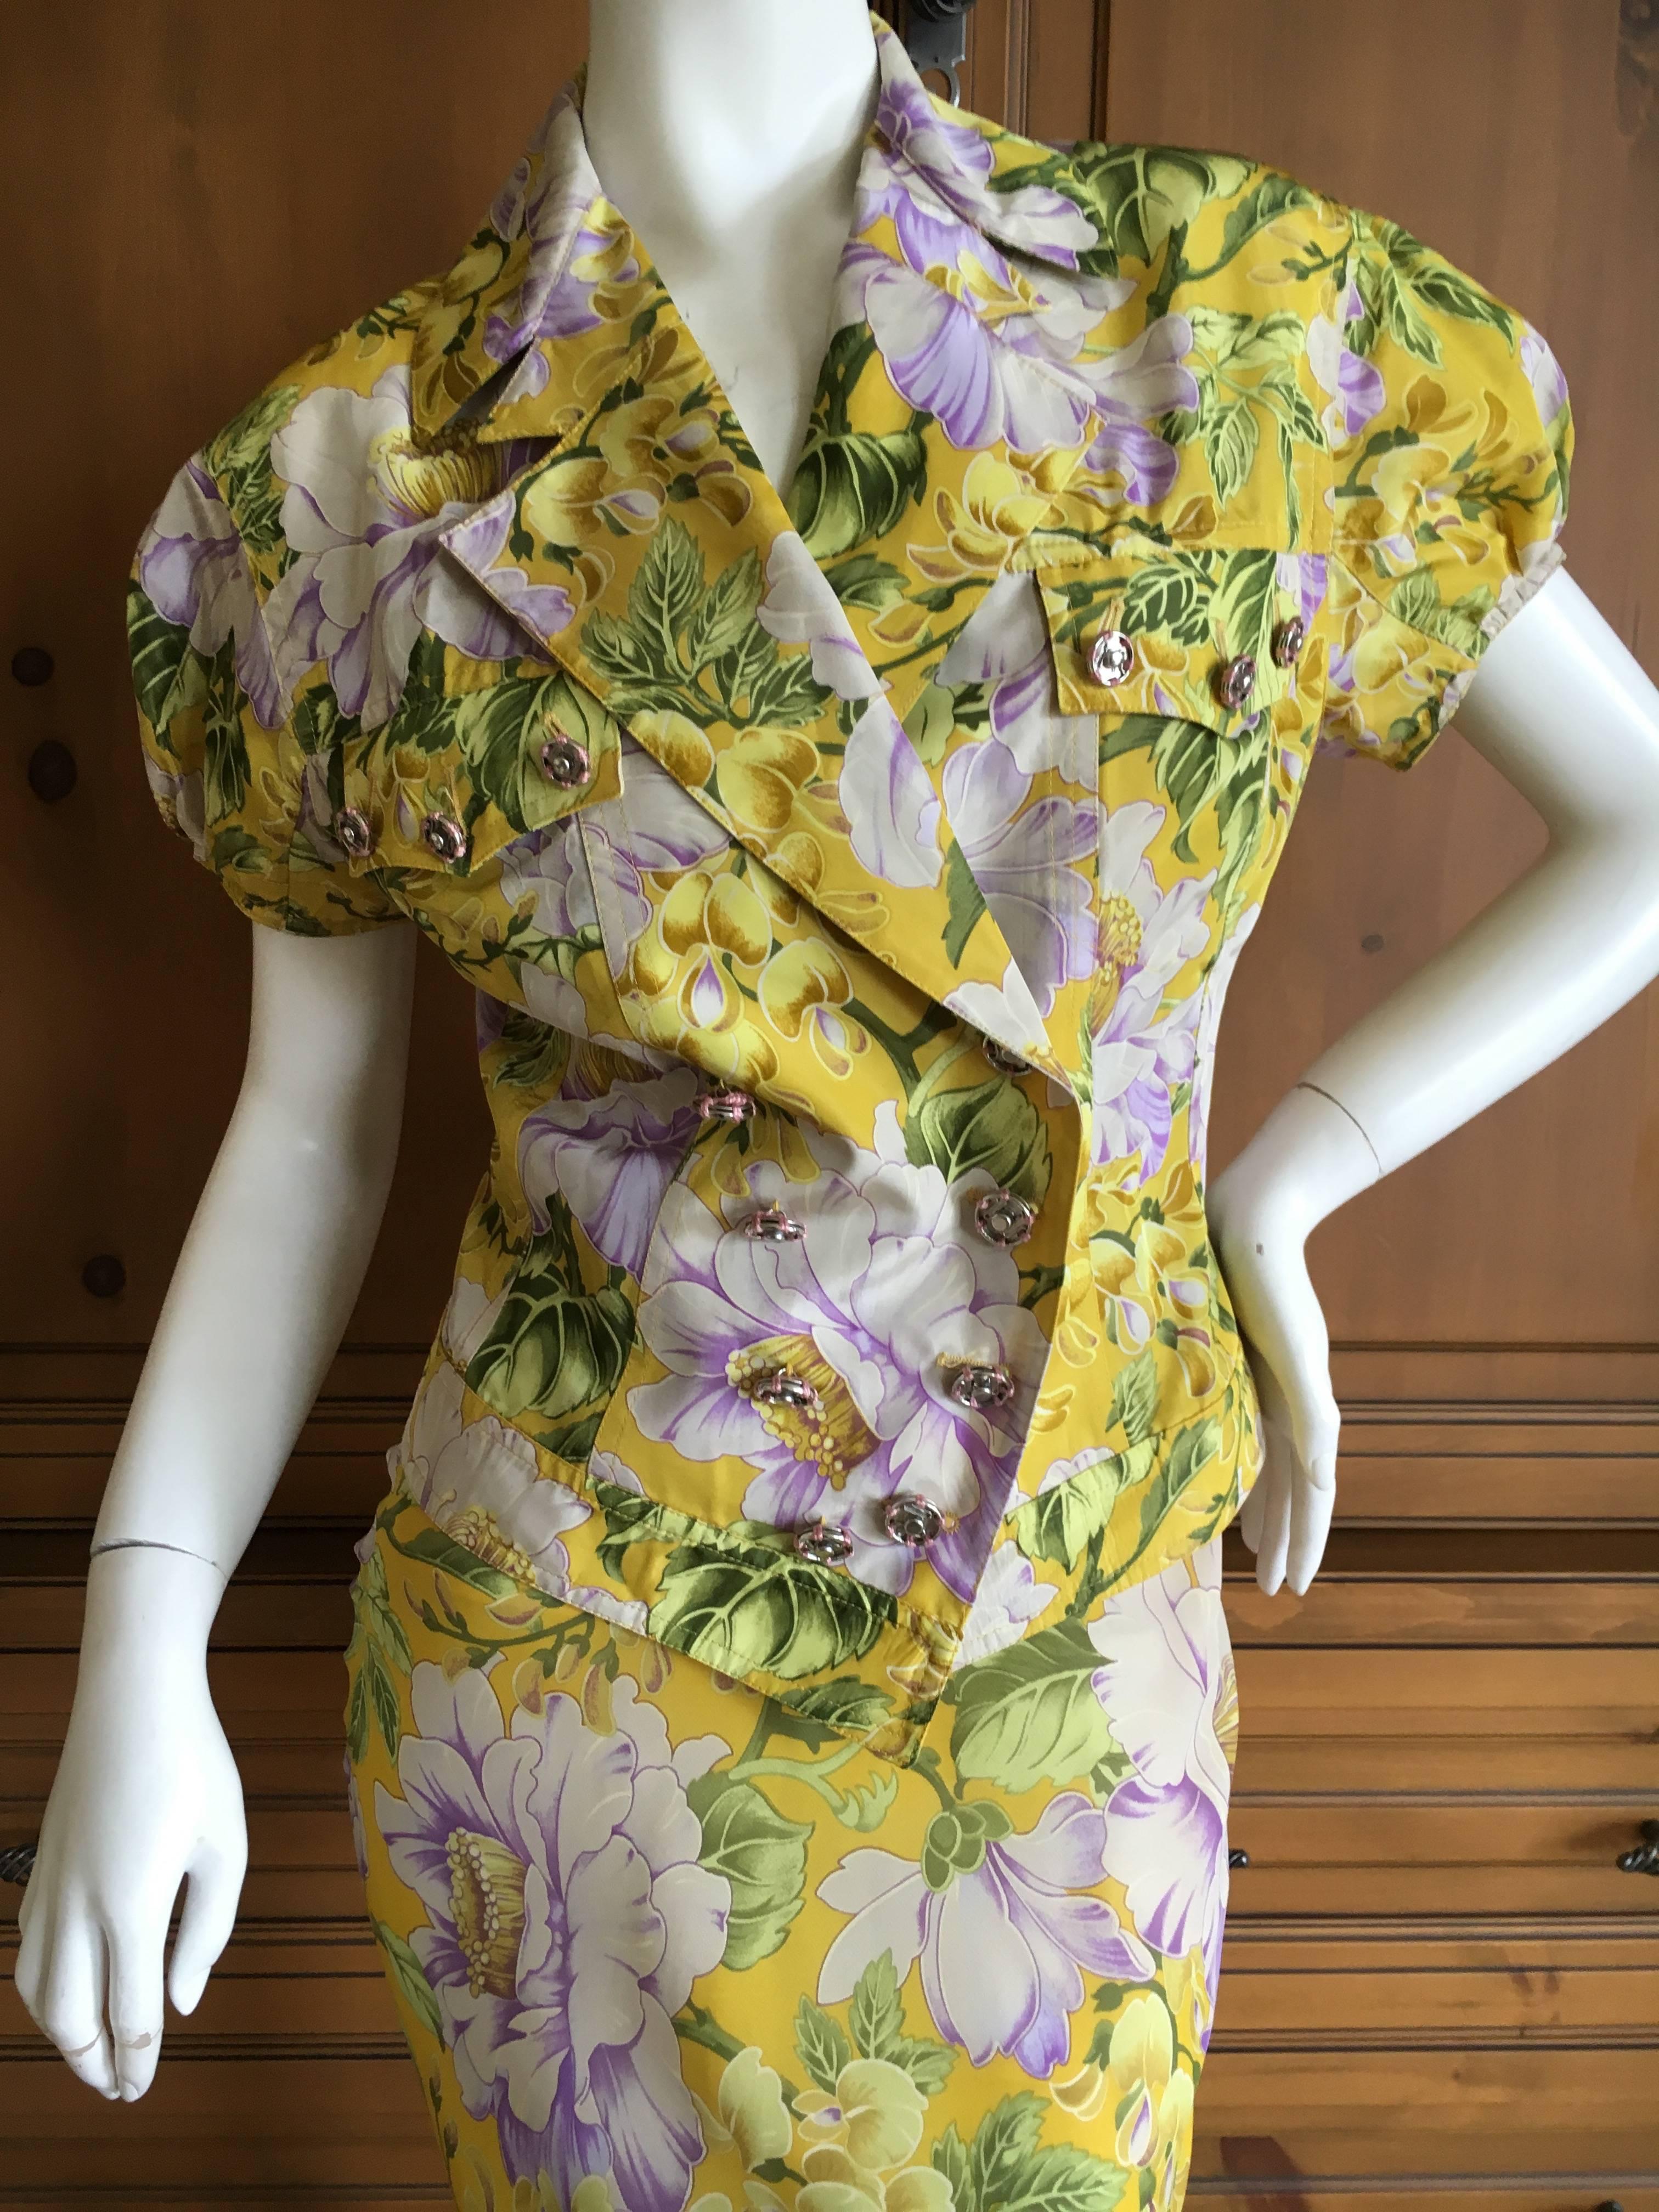 John Galliano Late 1980's Bias Cut Floral Dress with Matching Jacket 1